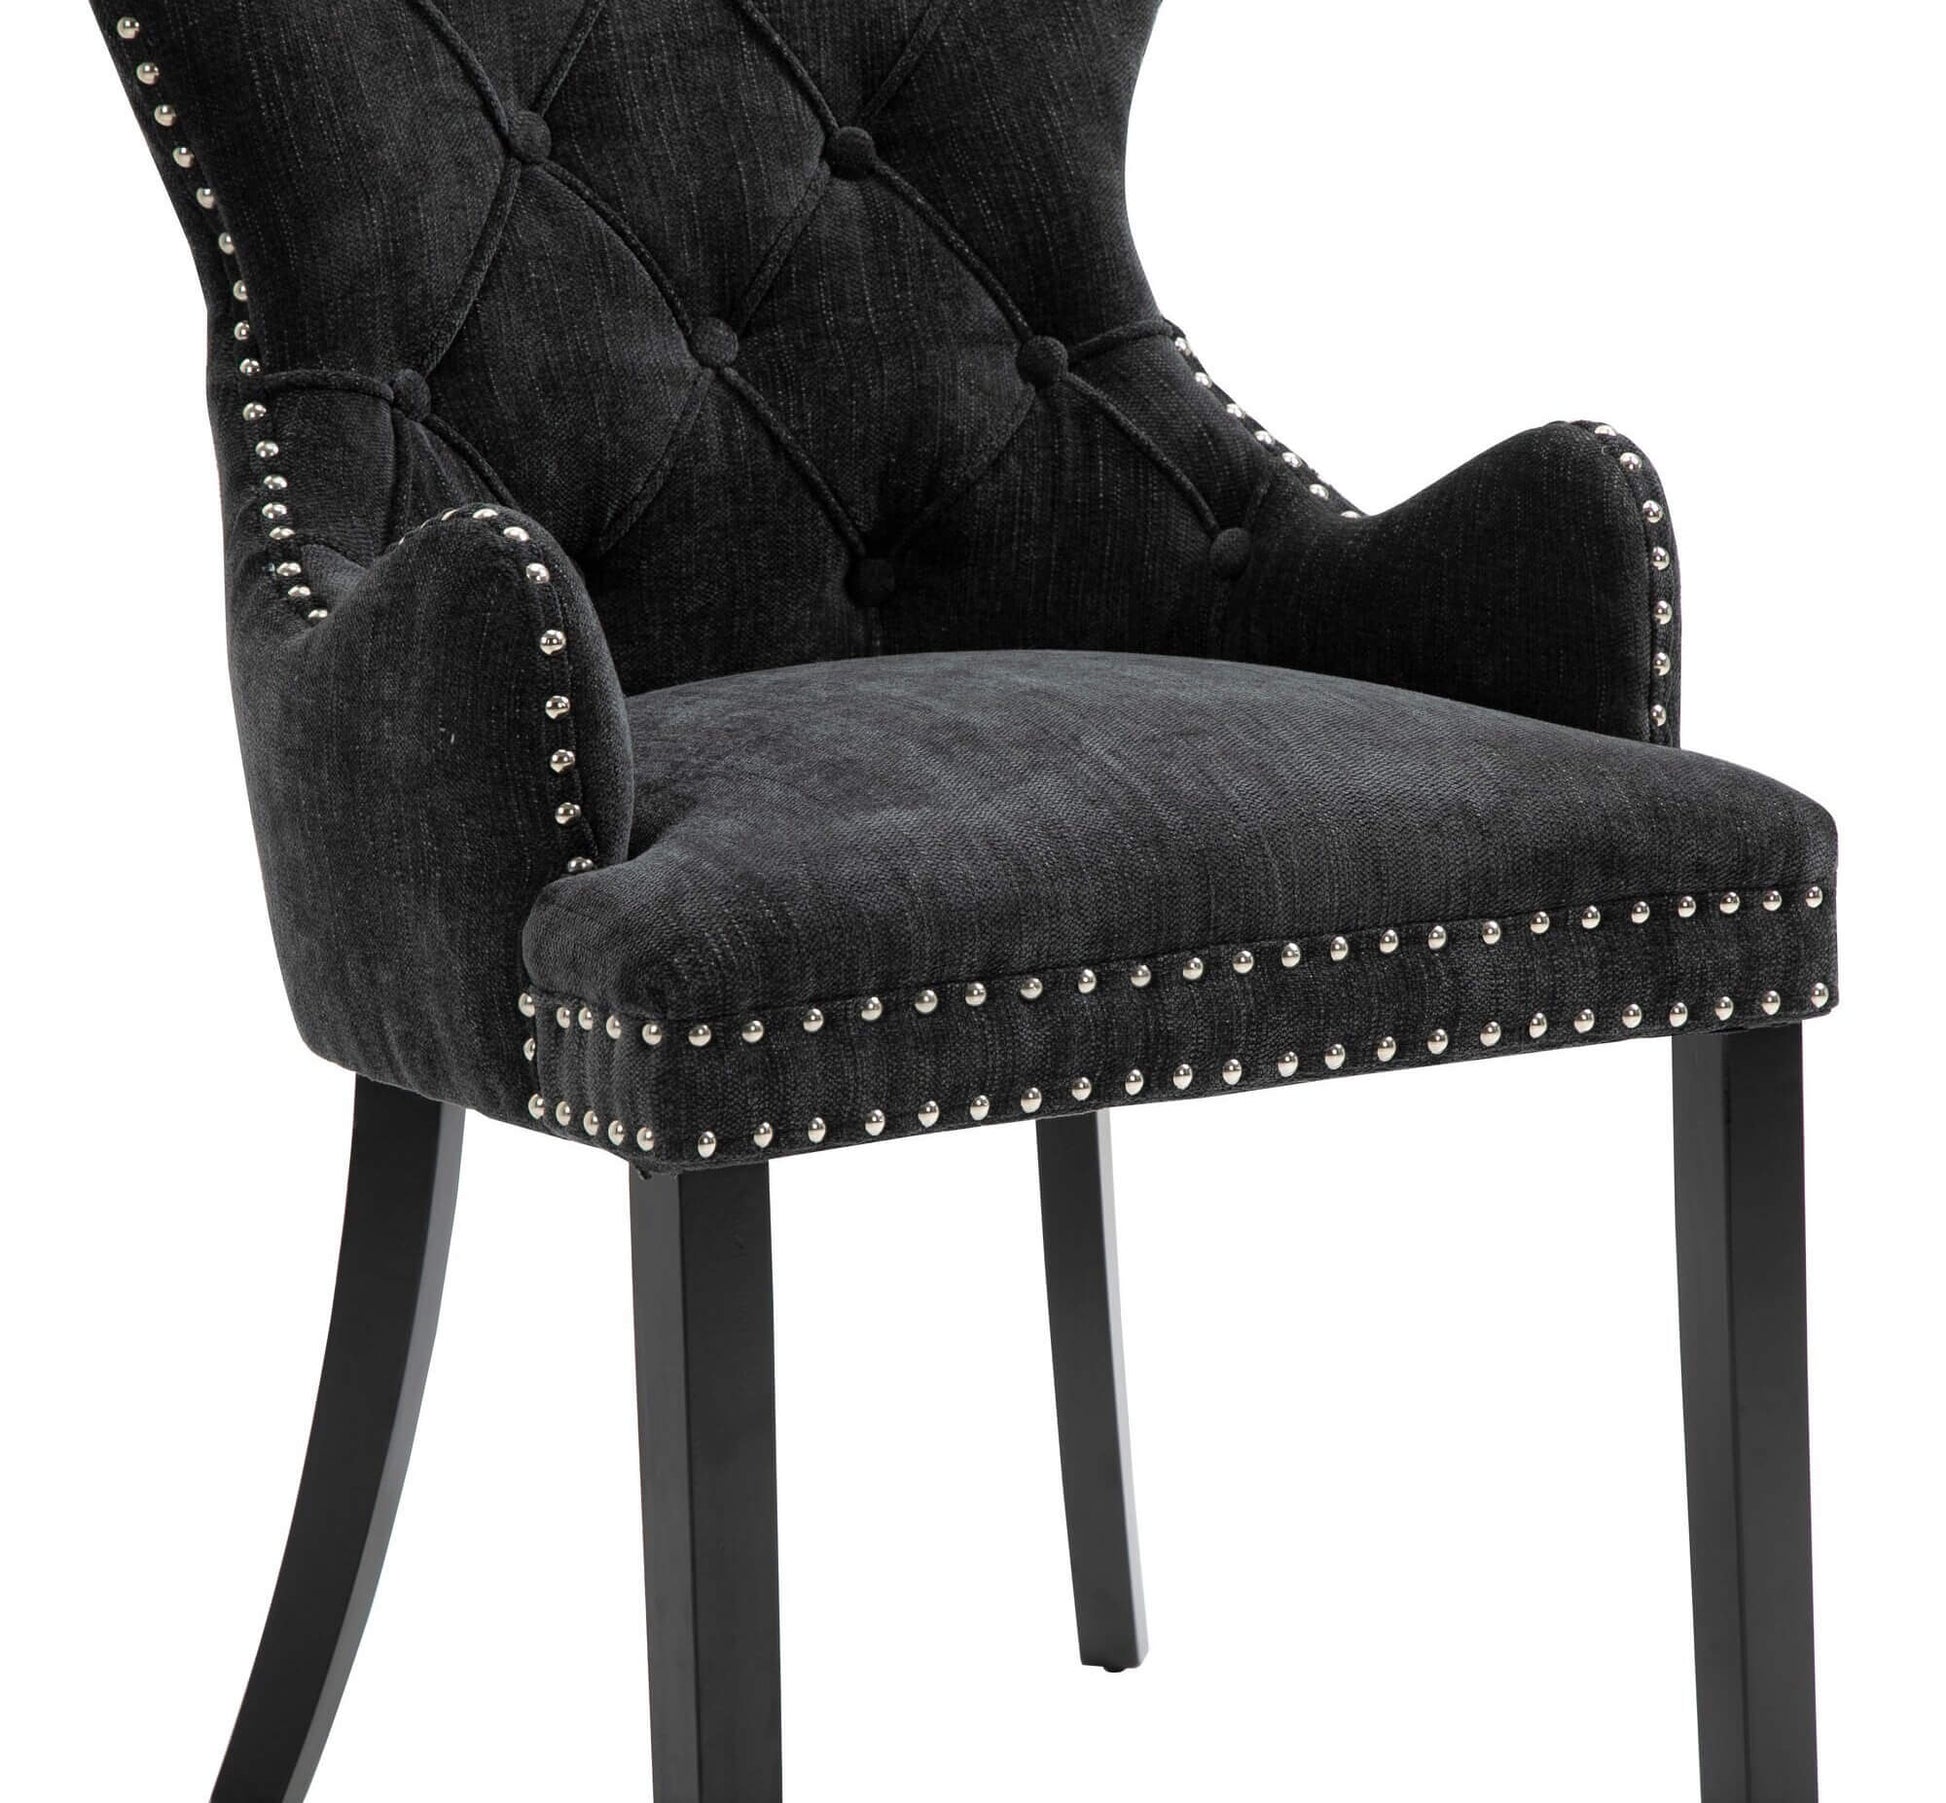 Genoa Version 1 | Fabric French Provincial Wooden Dining Chairs With Arms | Set Of 2 | Black